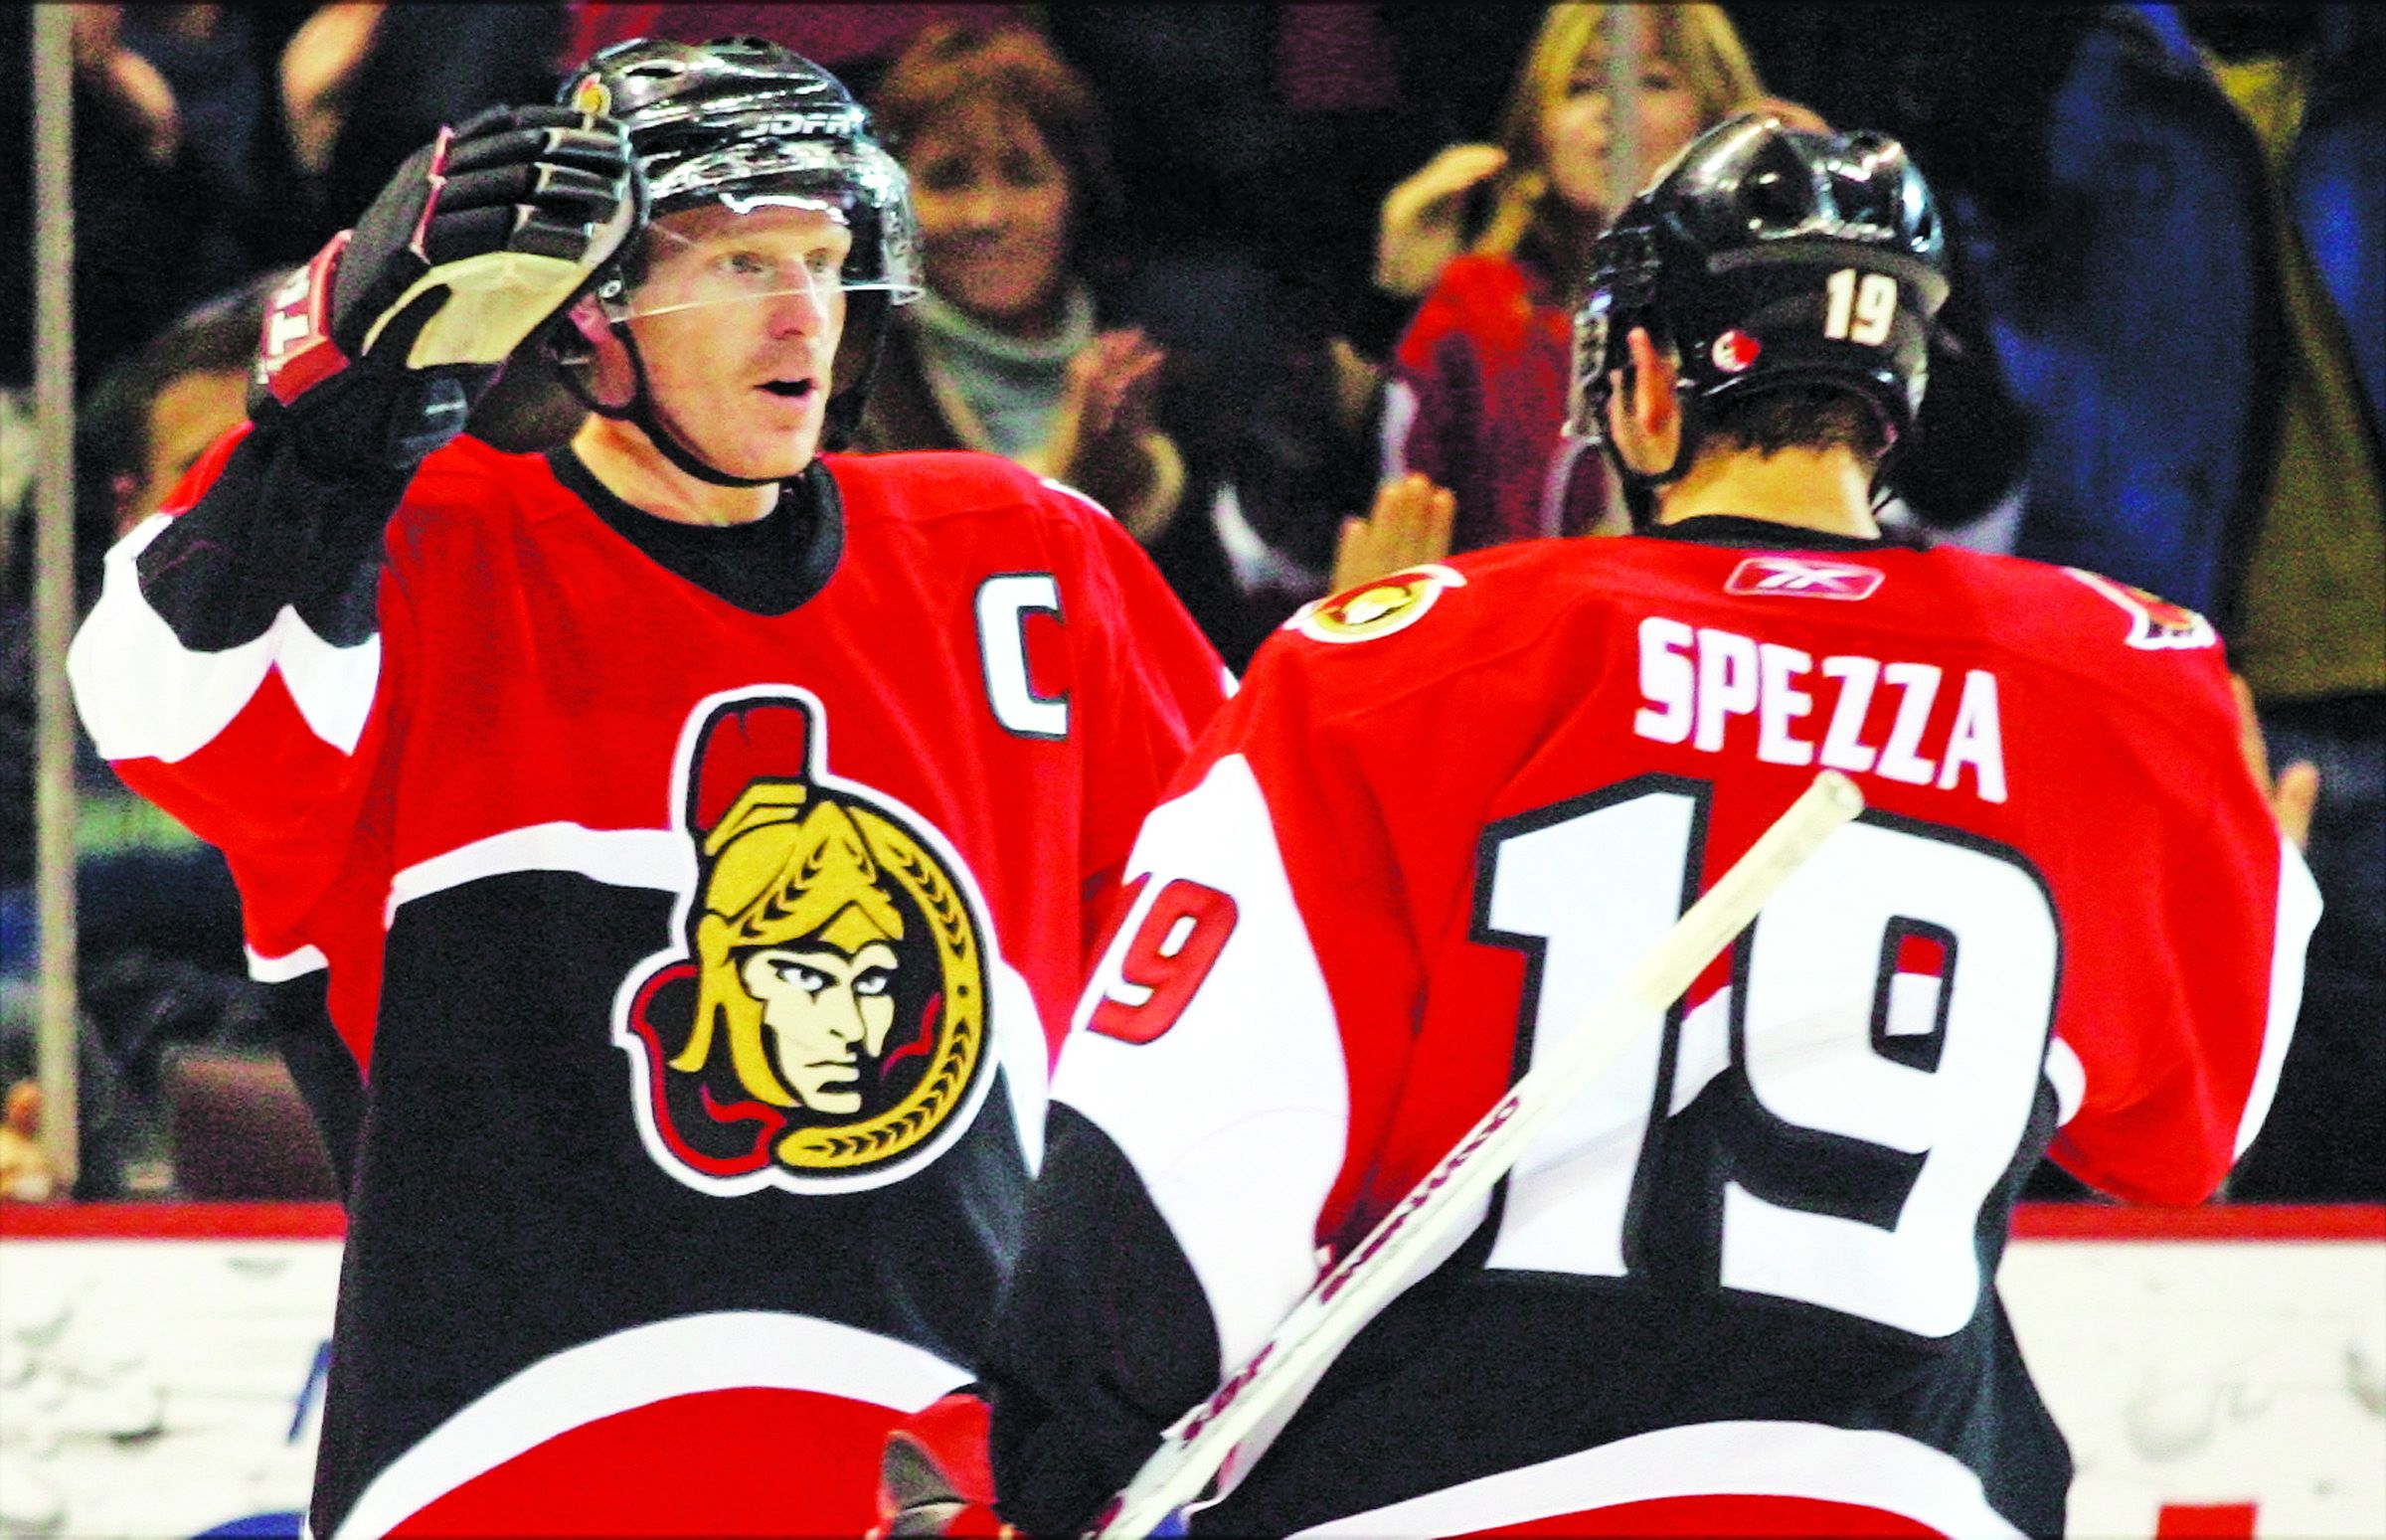 Even without a Cup, Alfie deserves to be in HHOF: Spezza